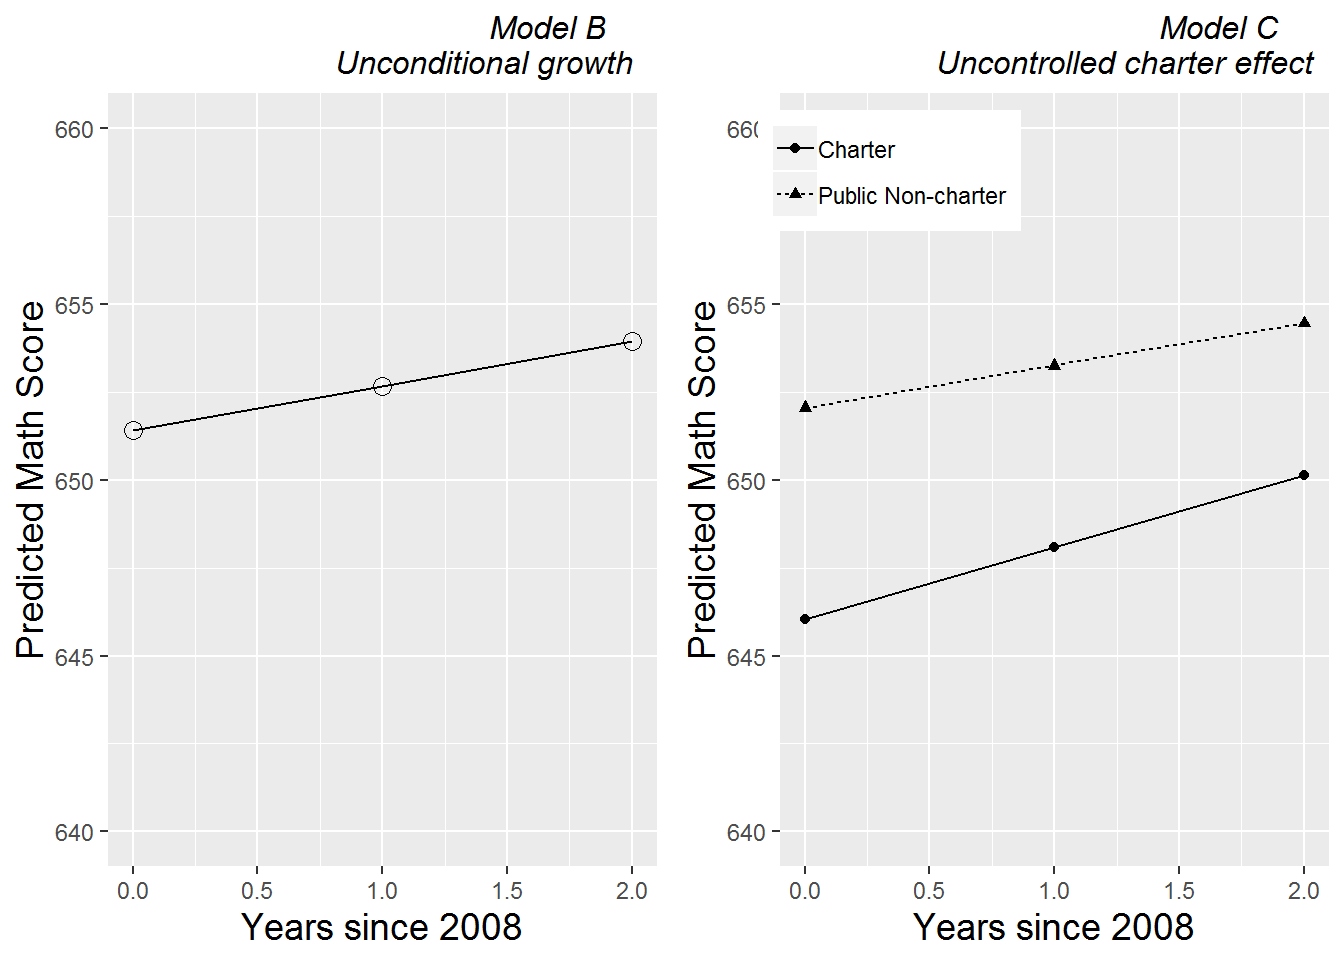  Fitted growth curves for Models B and C.